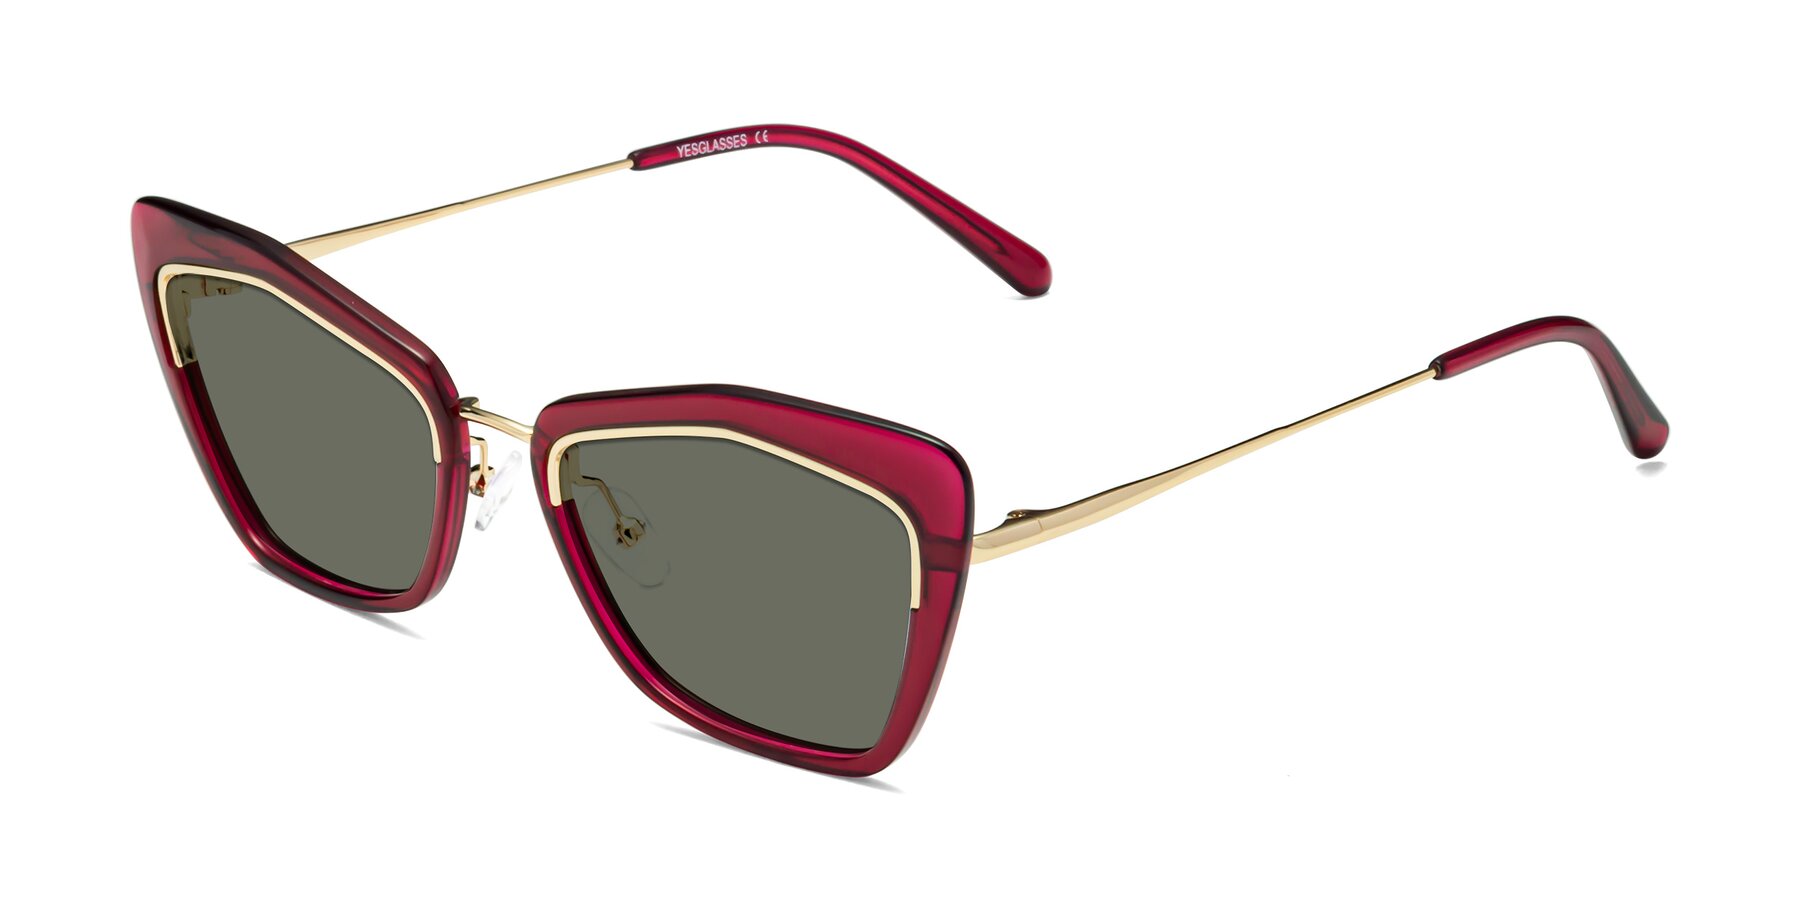 Angle of Lasso in Wine with Gray Polarized Lenses